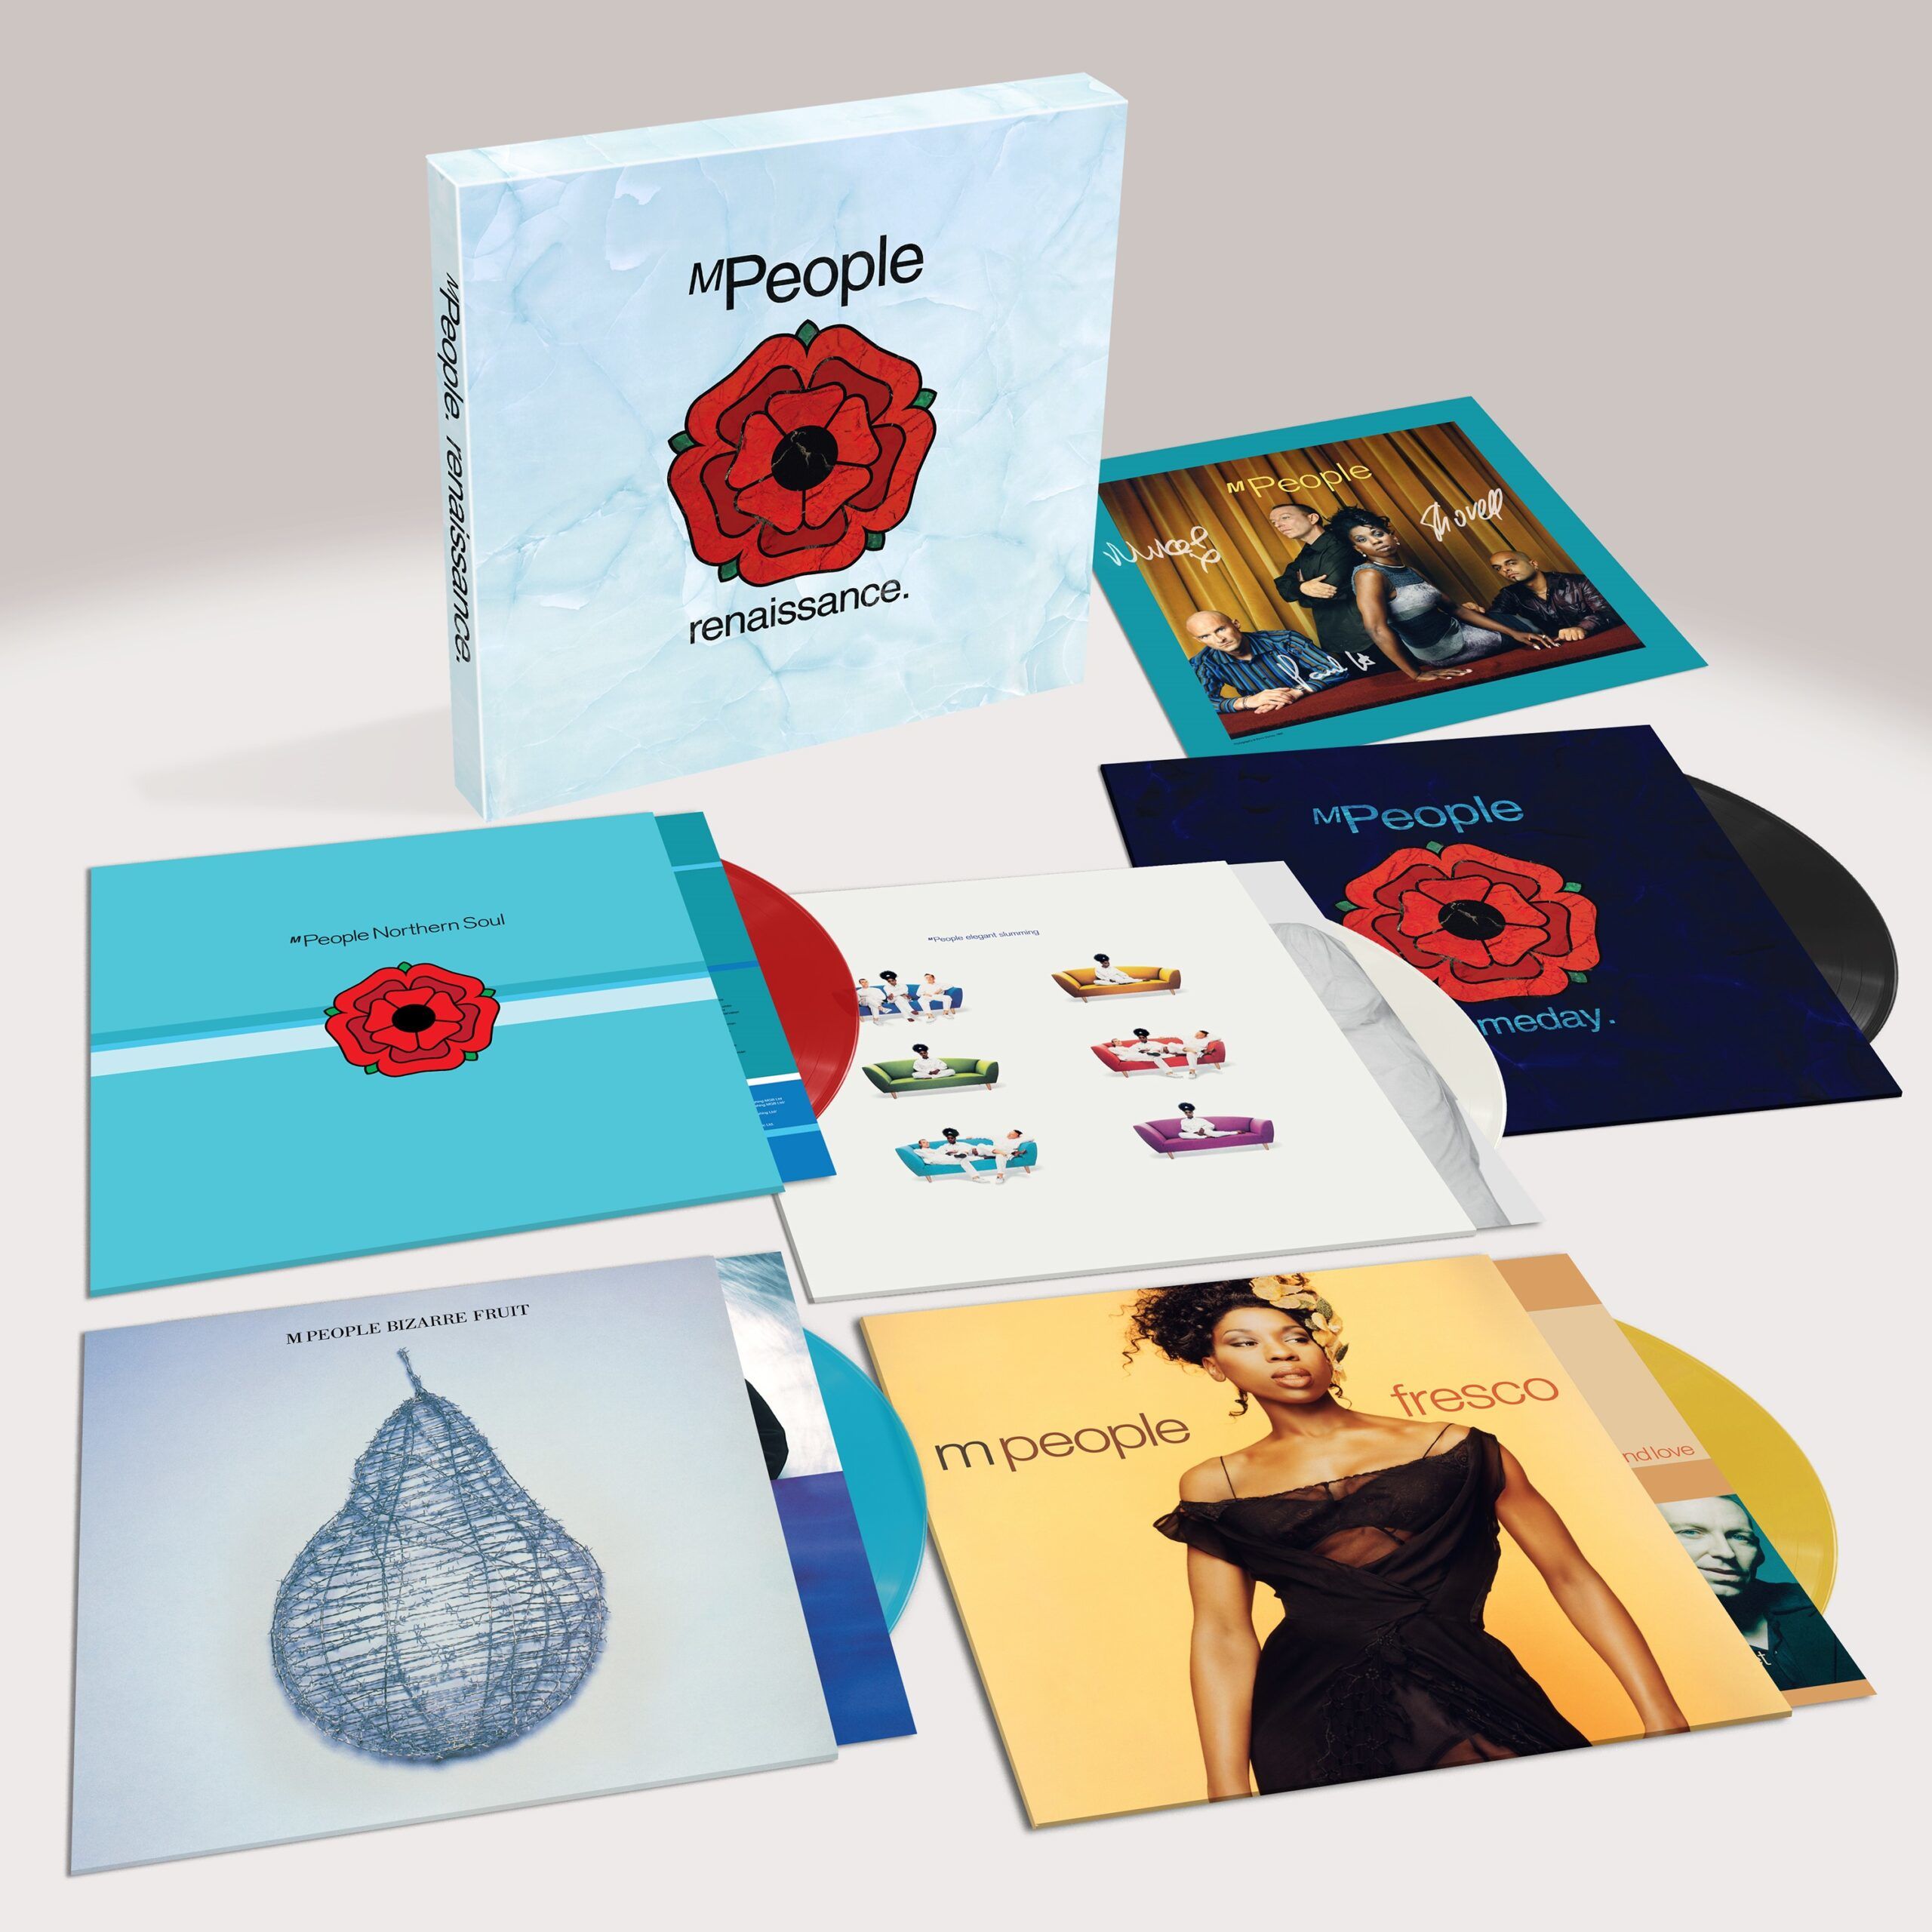 M People - Renaissance: Limited Red, White, Blue, Yellow + Black Vinyl 5LP Box Set (w/ Print Signed by Mike Pickering, Paul Heard and Shovell)